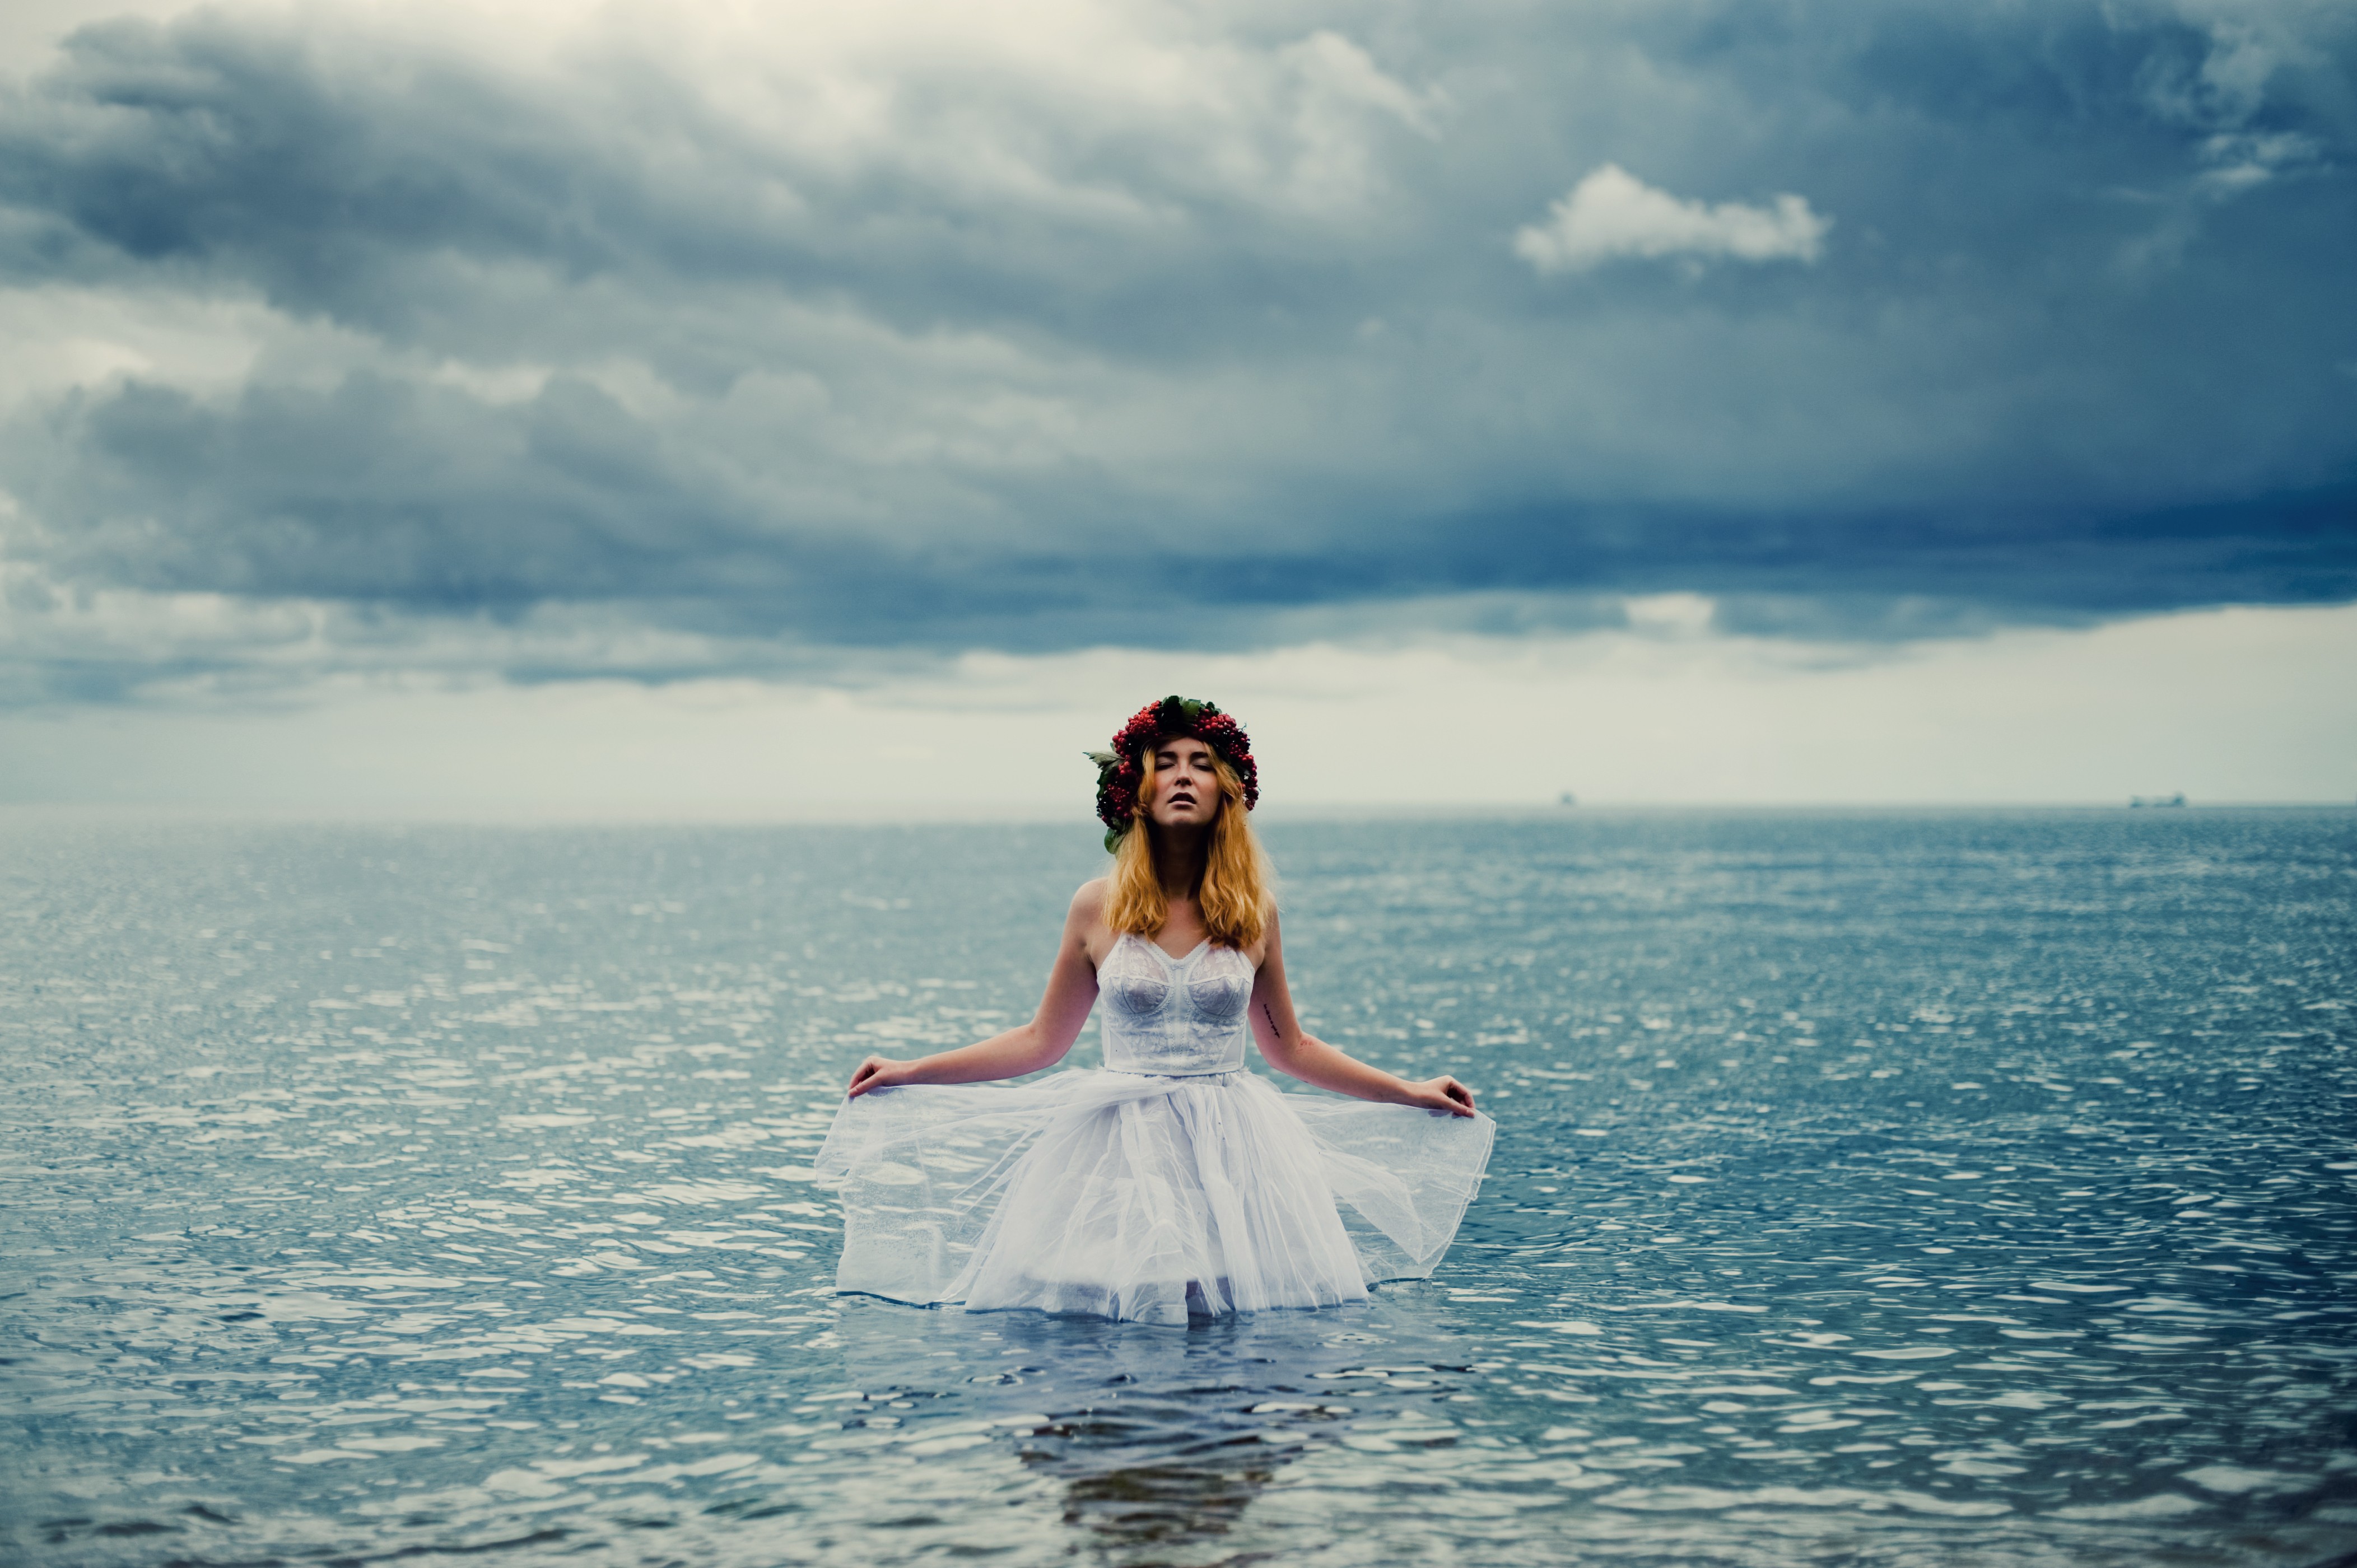 People 4208x2800 women model sea clouds blonde white dress outdoors flower in hair tattoo frontal view closed eyes in water sky horizon white clothing standing women outdoors